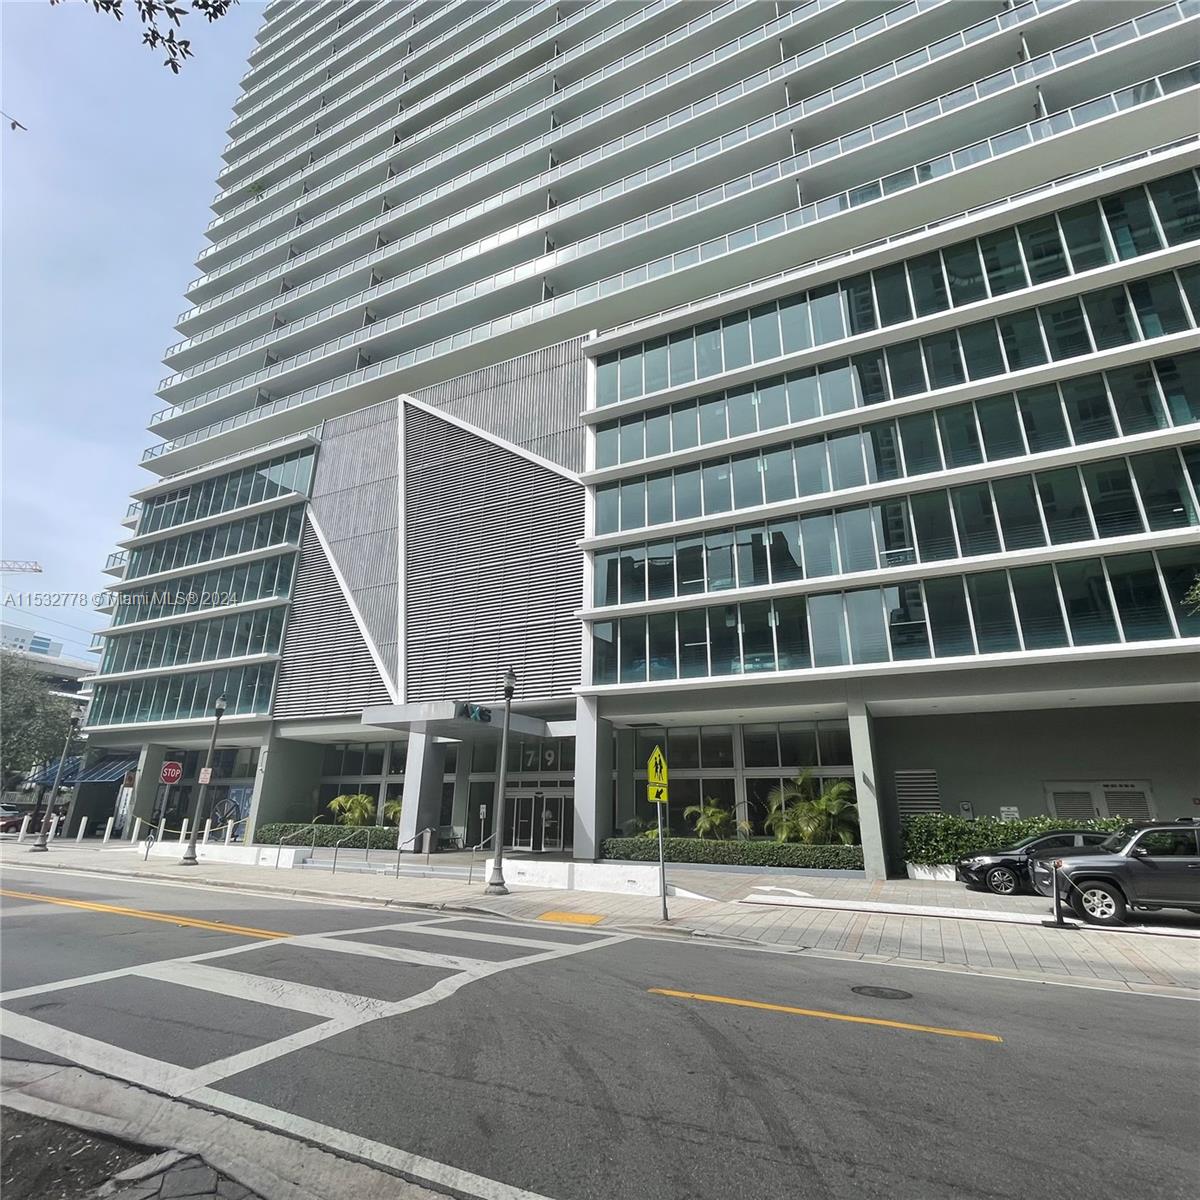 Beautiful 1 bedroom and 1 bathroom unit in Brickell area, stainless steel appliances, quartz countertop, wood kitchen cabinets. Marble floor. Great city views. Amenities include fitness center, pool, BBQ area, spa. Located in the heart of Brickell. Close to shopping centers, Brickell City Centre, Merrick Brickell mall, supermarkets, Metro Mover, Metro Rail, restaurants and clubs.